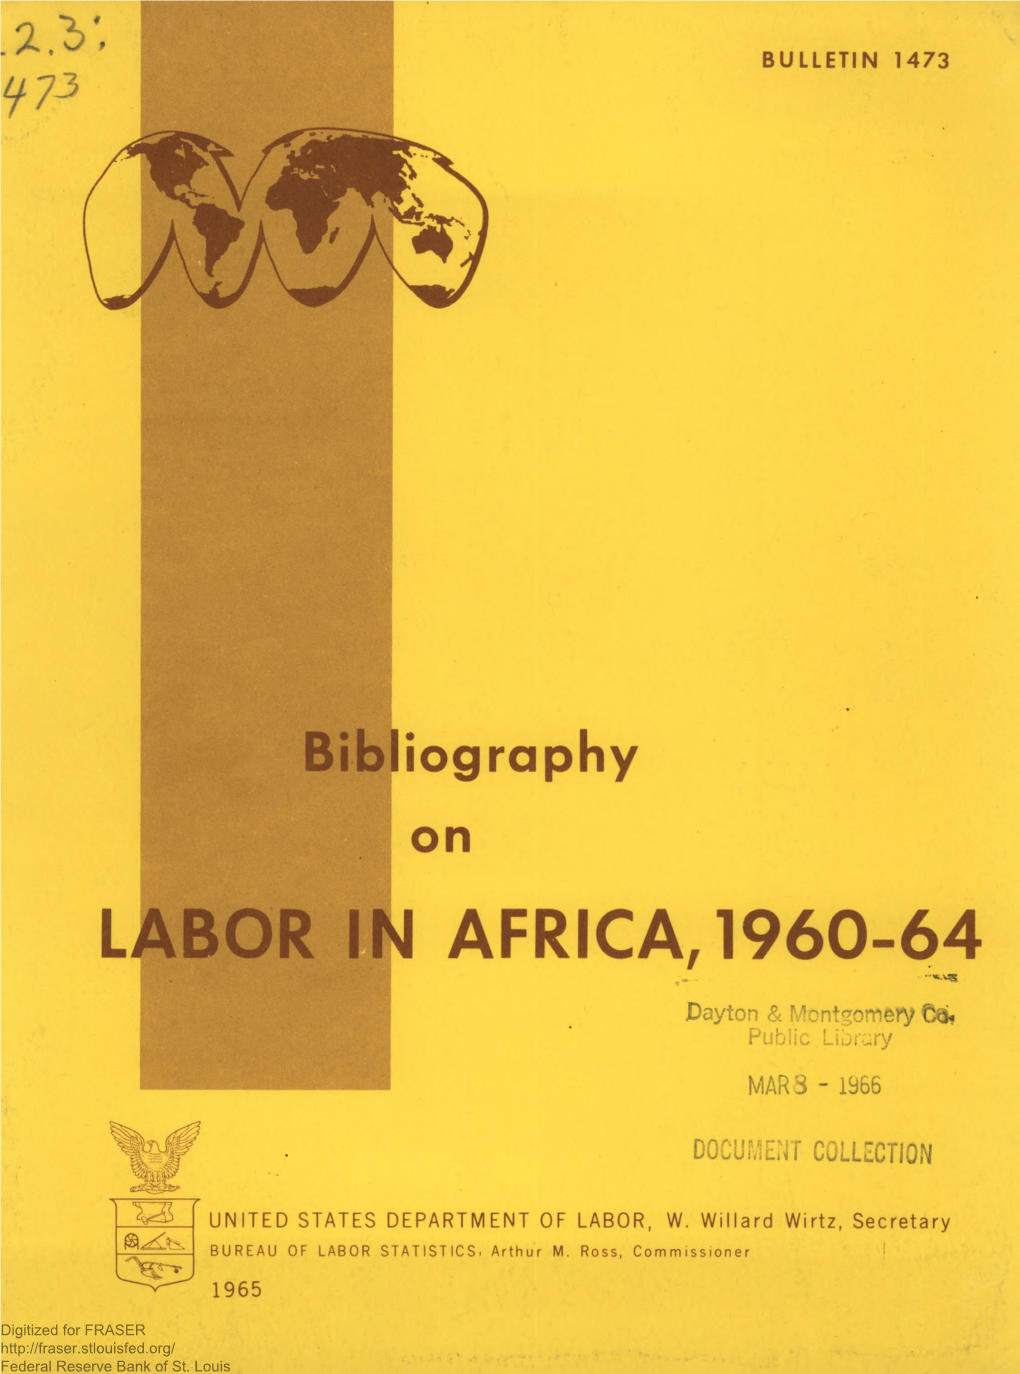 Bibliography on LABOR in AFRICA, 1960-64